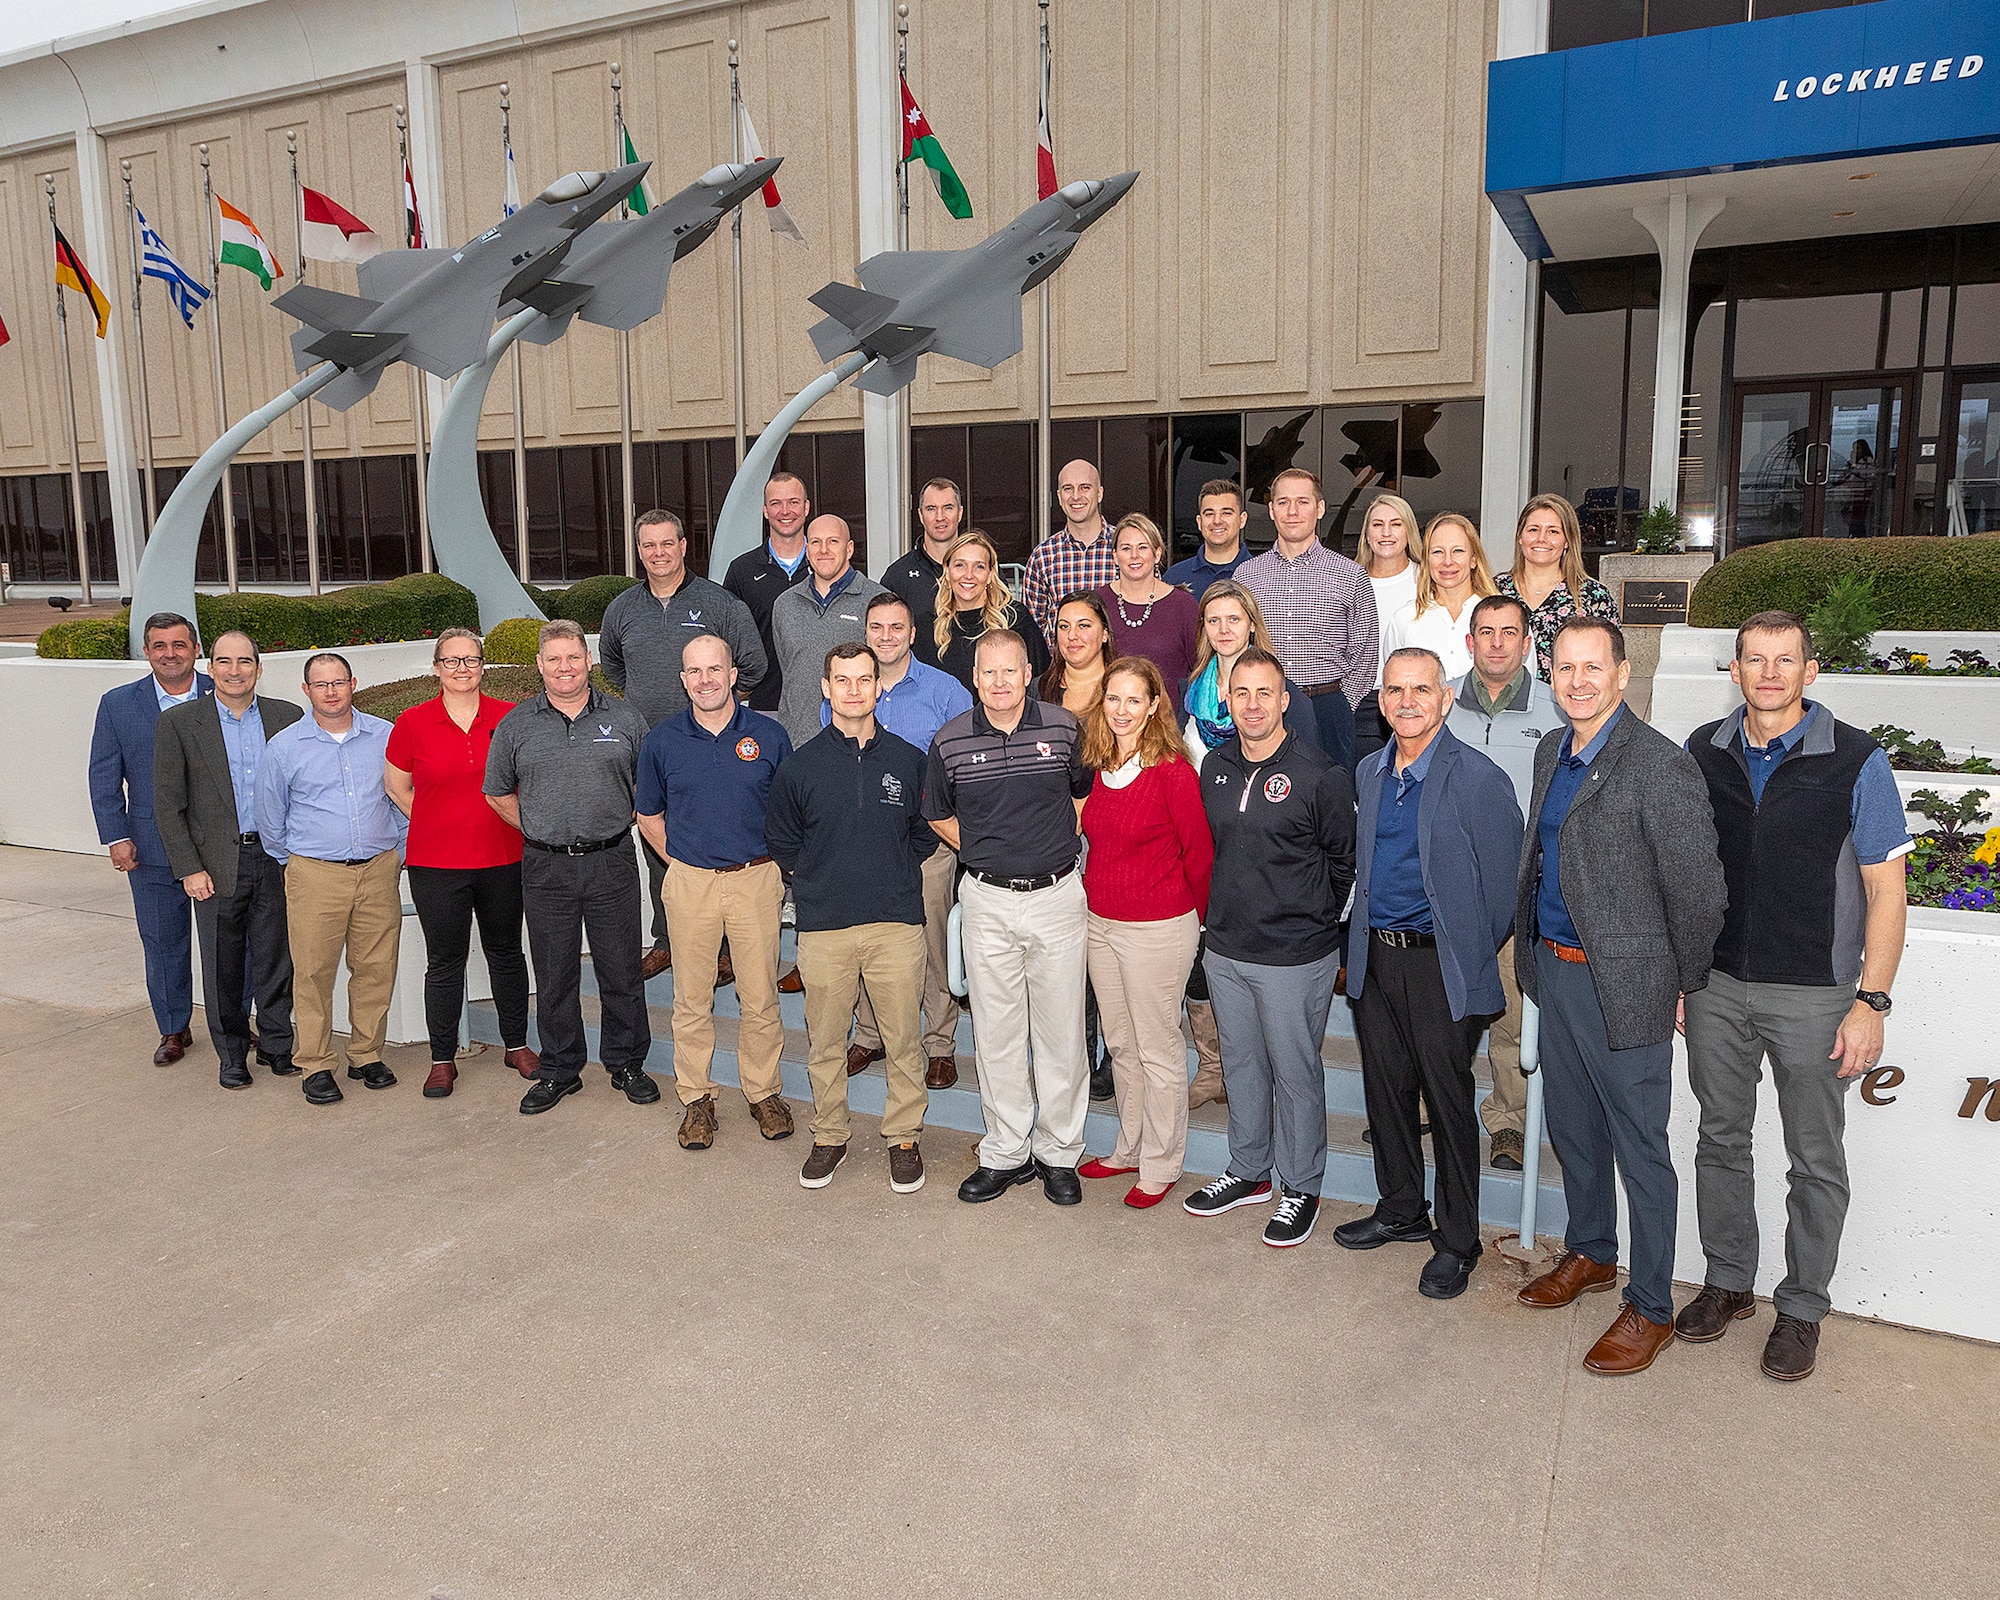 115th Fighter Wing members pose for a group photo at the entrance of Lockheed Martin Aeronautics